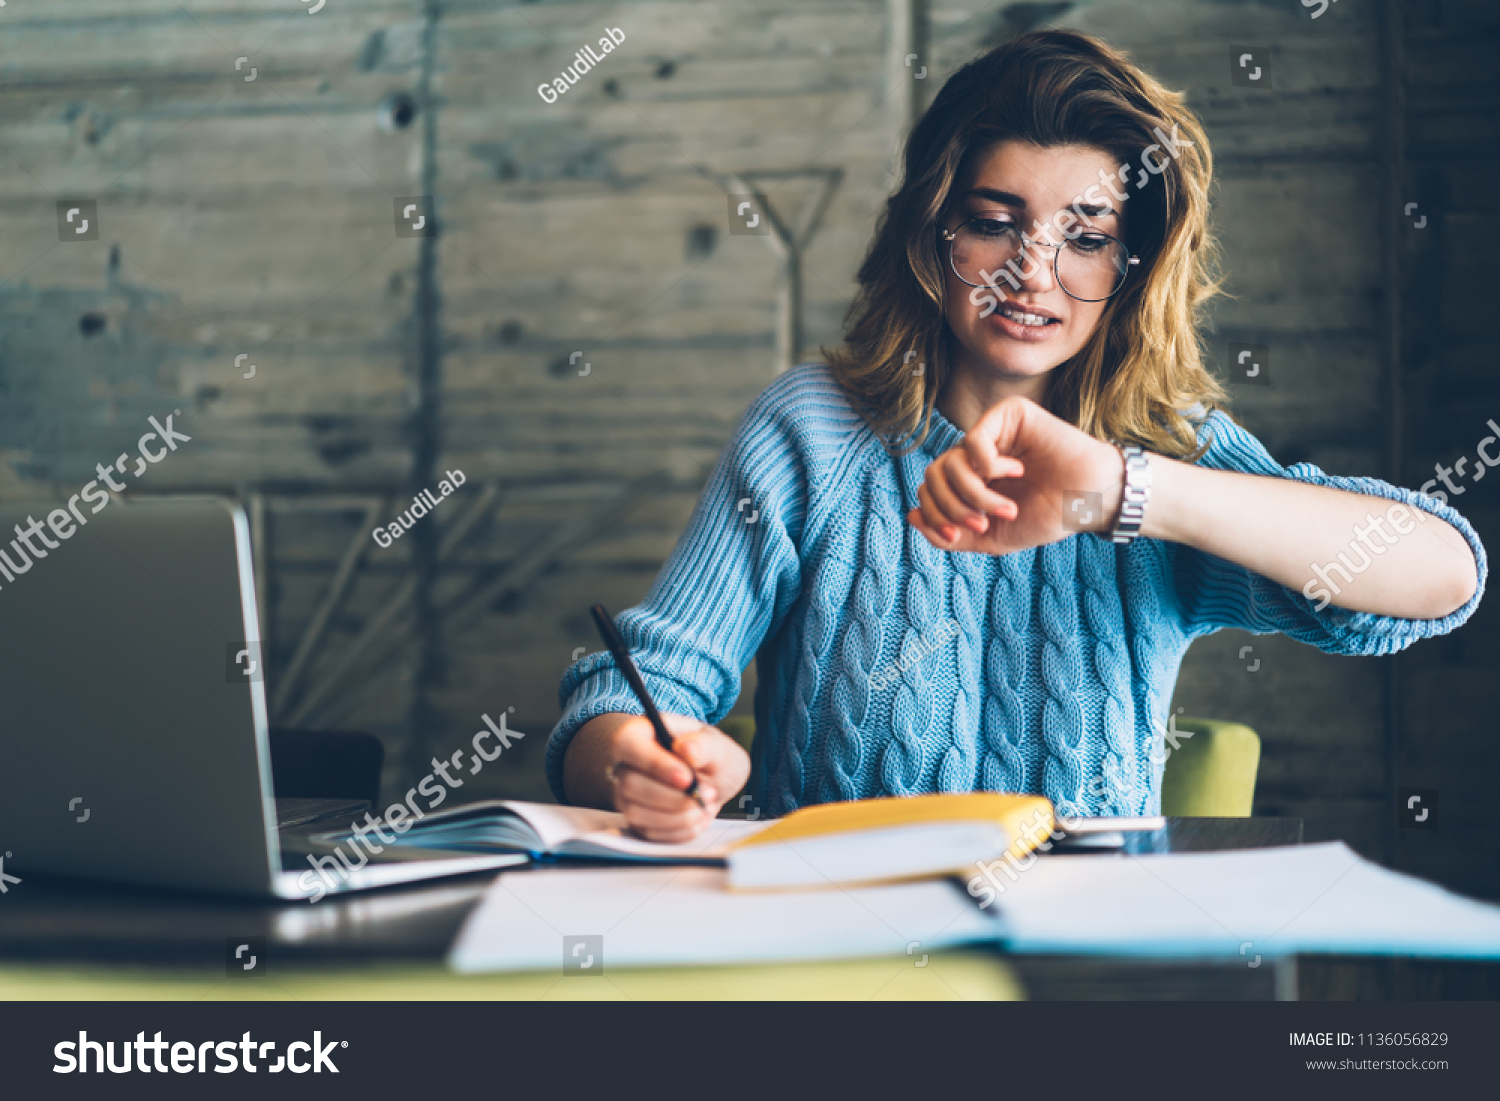 Caucasian hipster girl checking time on wristwatch feeling unhappy and hurrying up on deadline learning and doing homework using literature and laptop at wifi zone, stressed student preparing for exam #1136056829